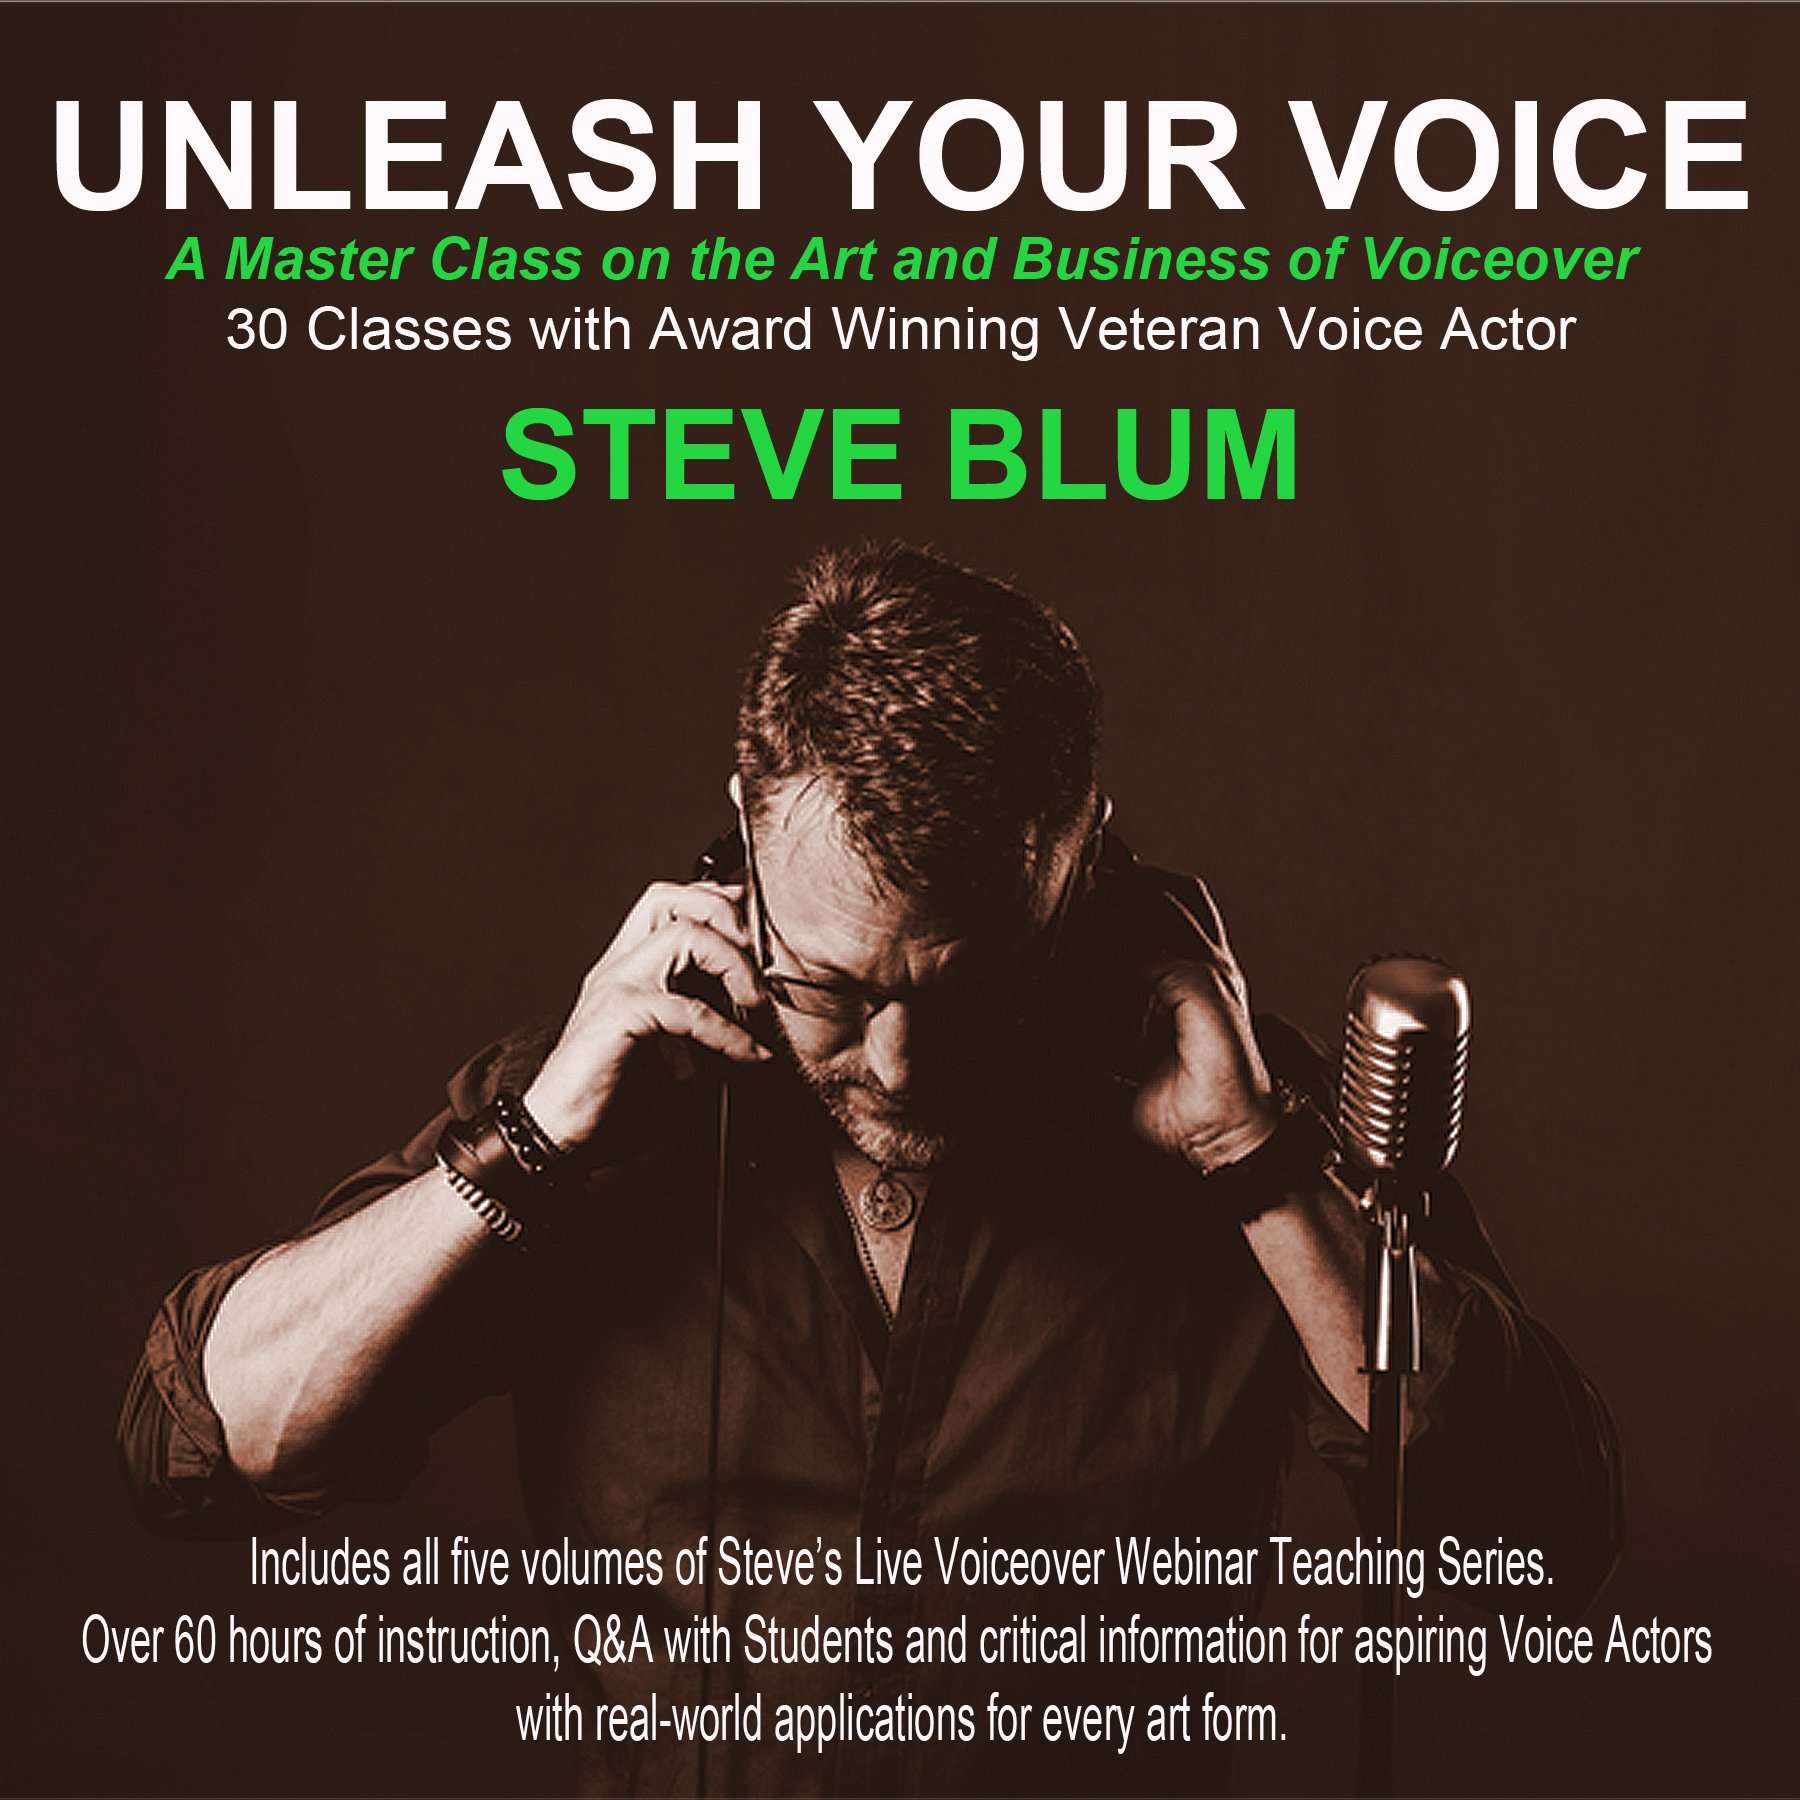 Unleash you voice a master class on the businsiness of voice over by Steve Blum